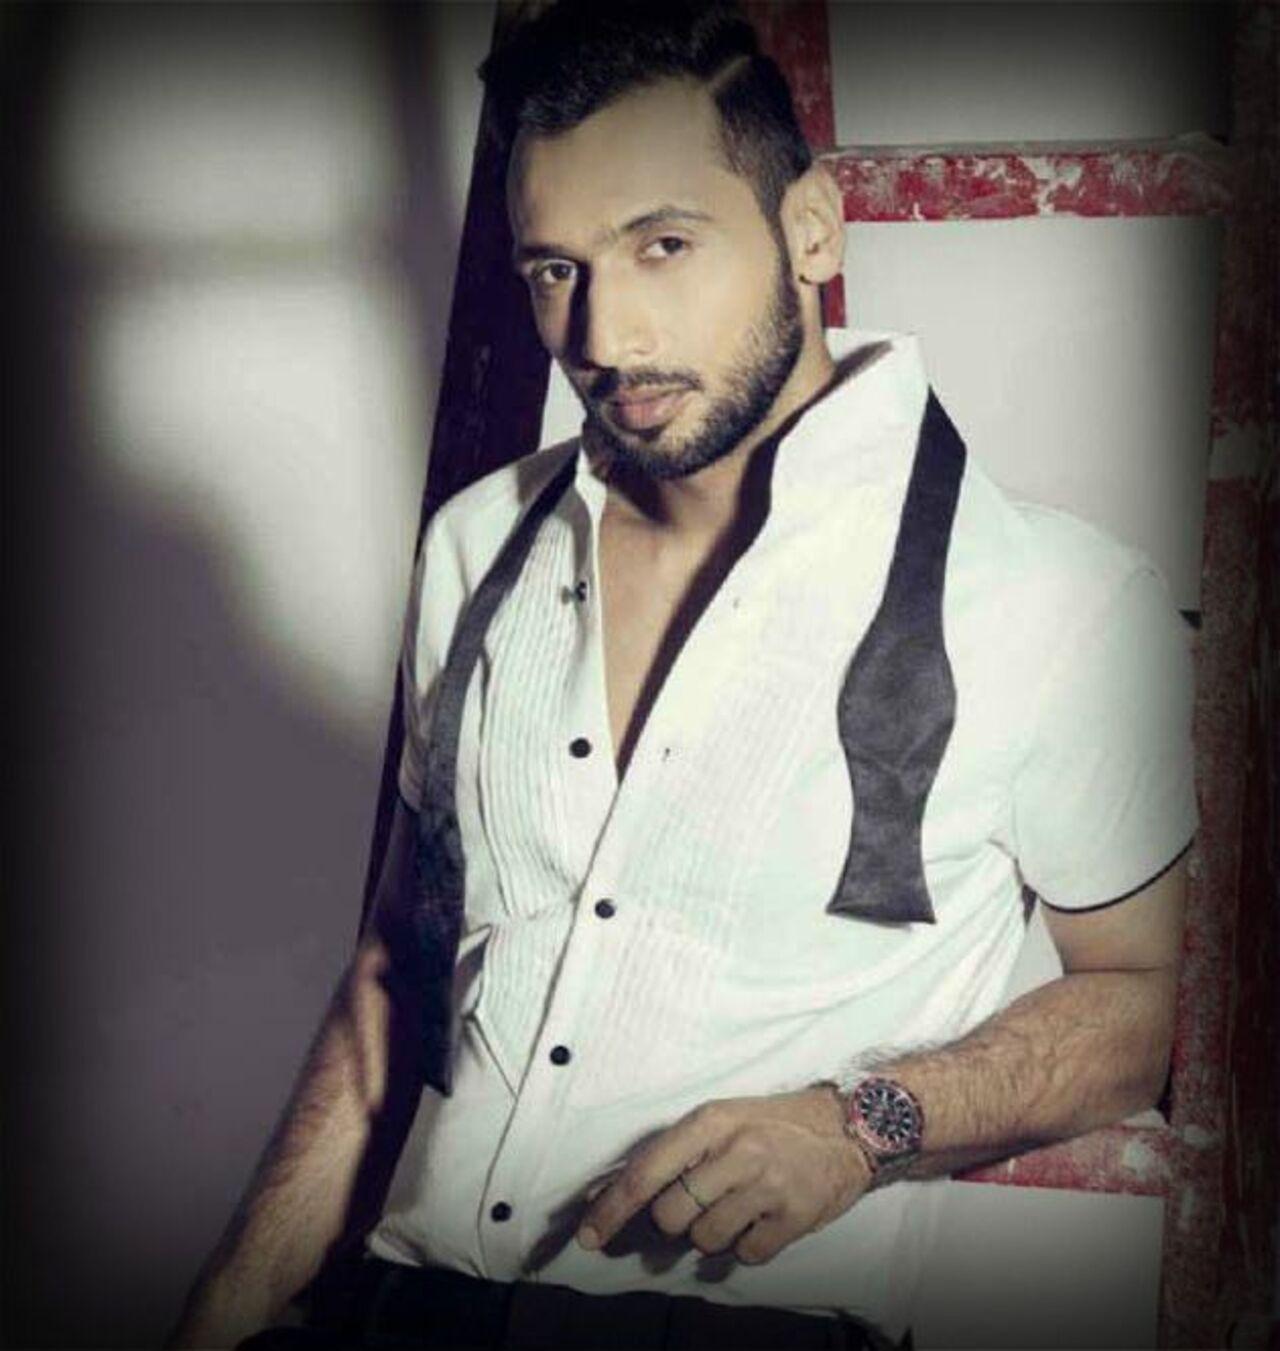 Punit Pathak: Choreographer-actor Punit Pathak took home the trophy in the 9th season of Khatron Ke Khiladi, hosted by Rohit Shetty